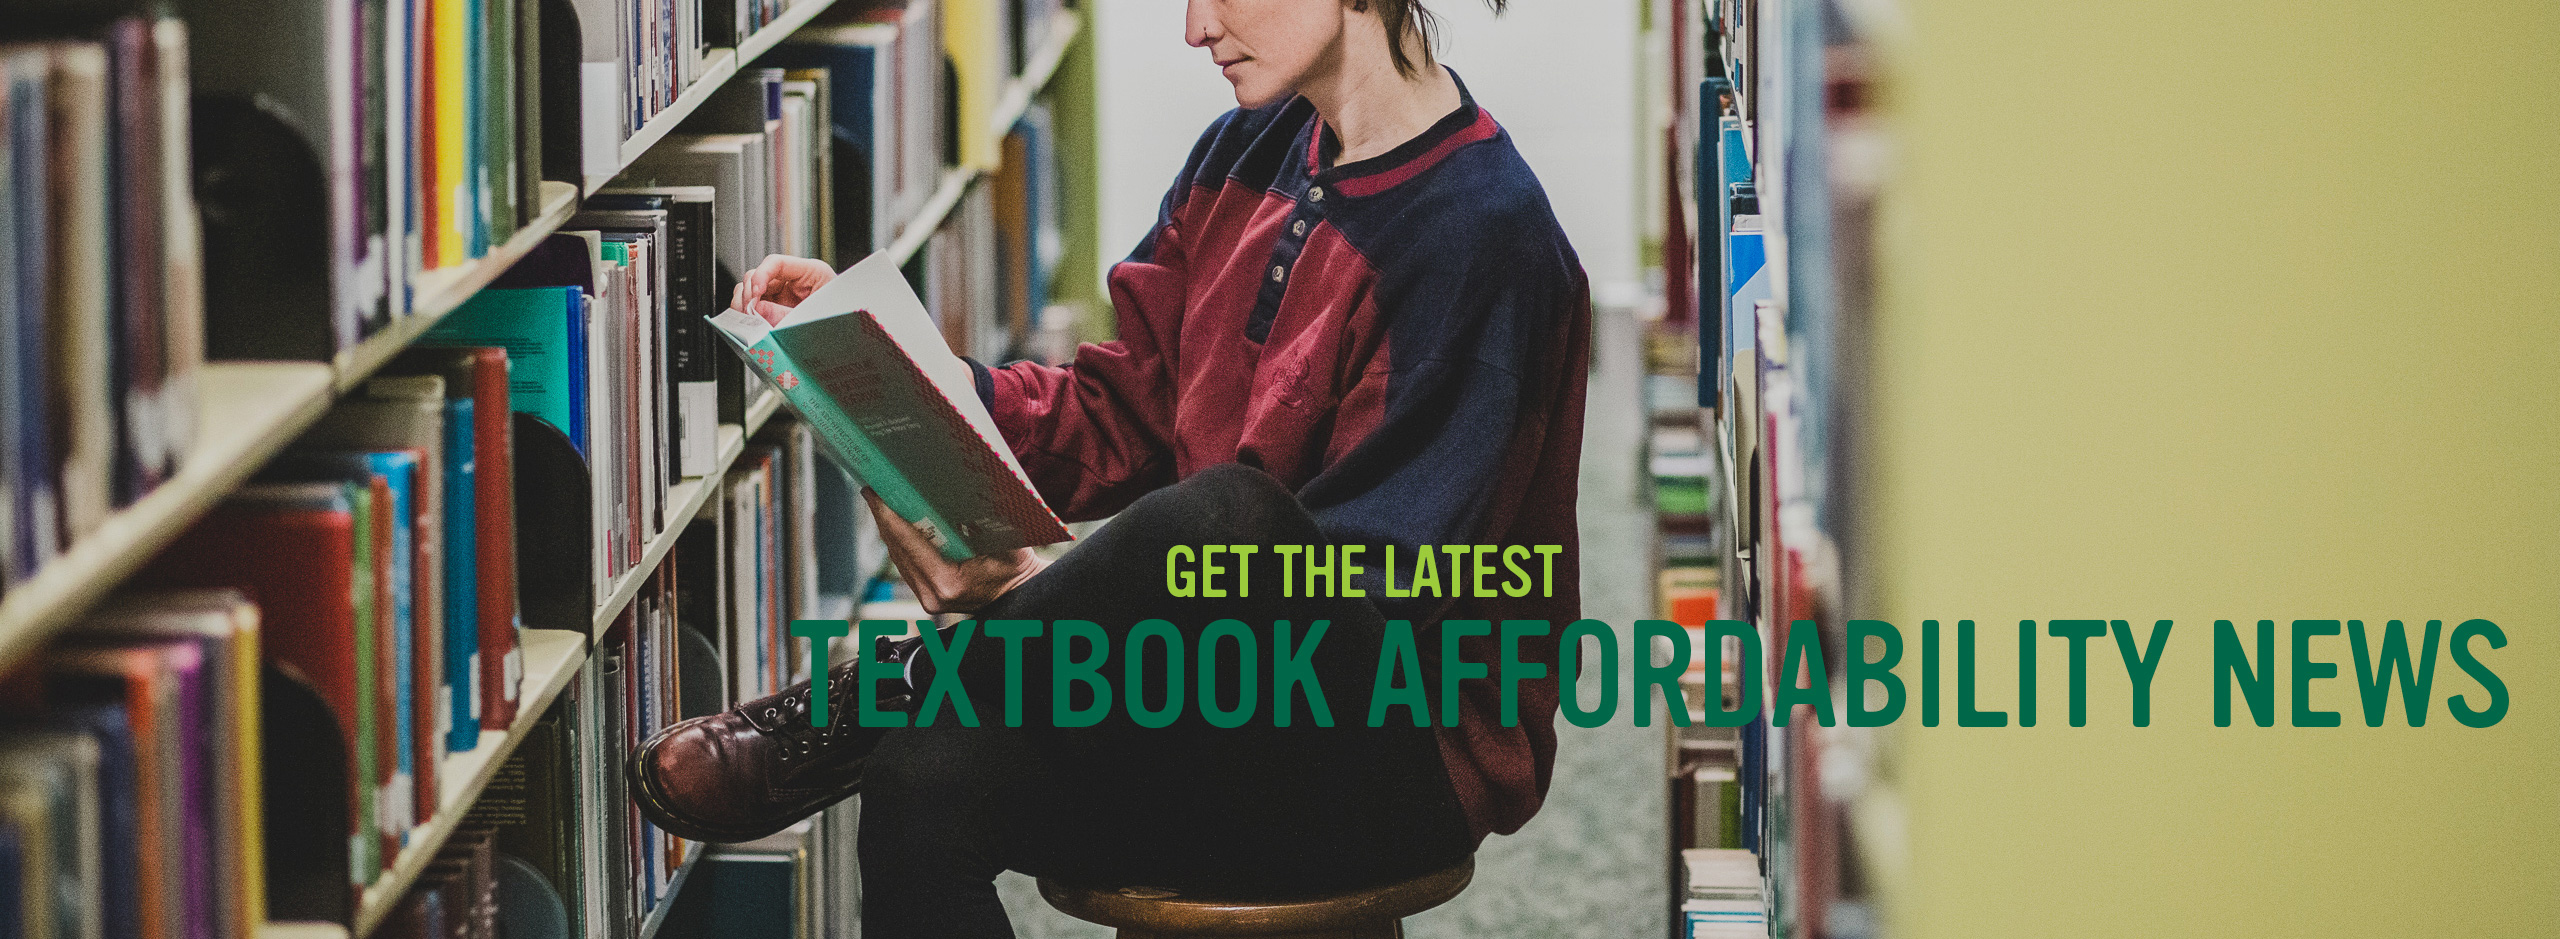 click here to get the latest textbook affordability news